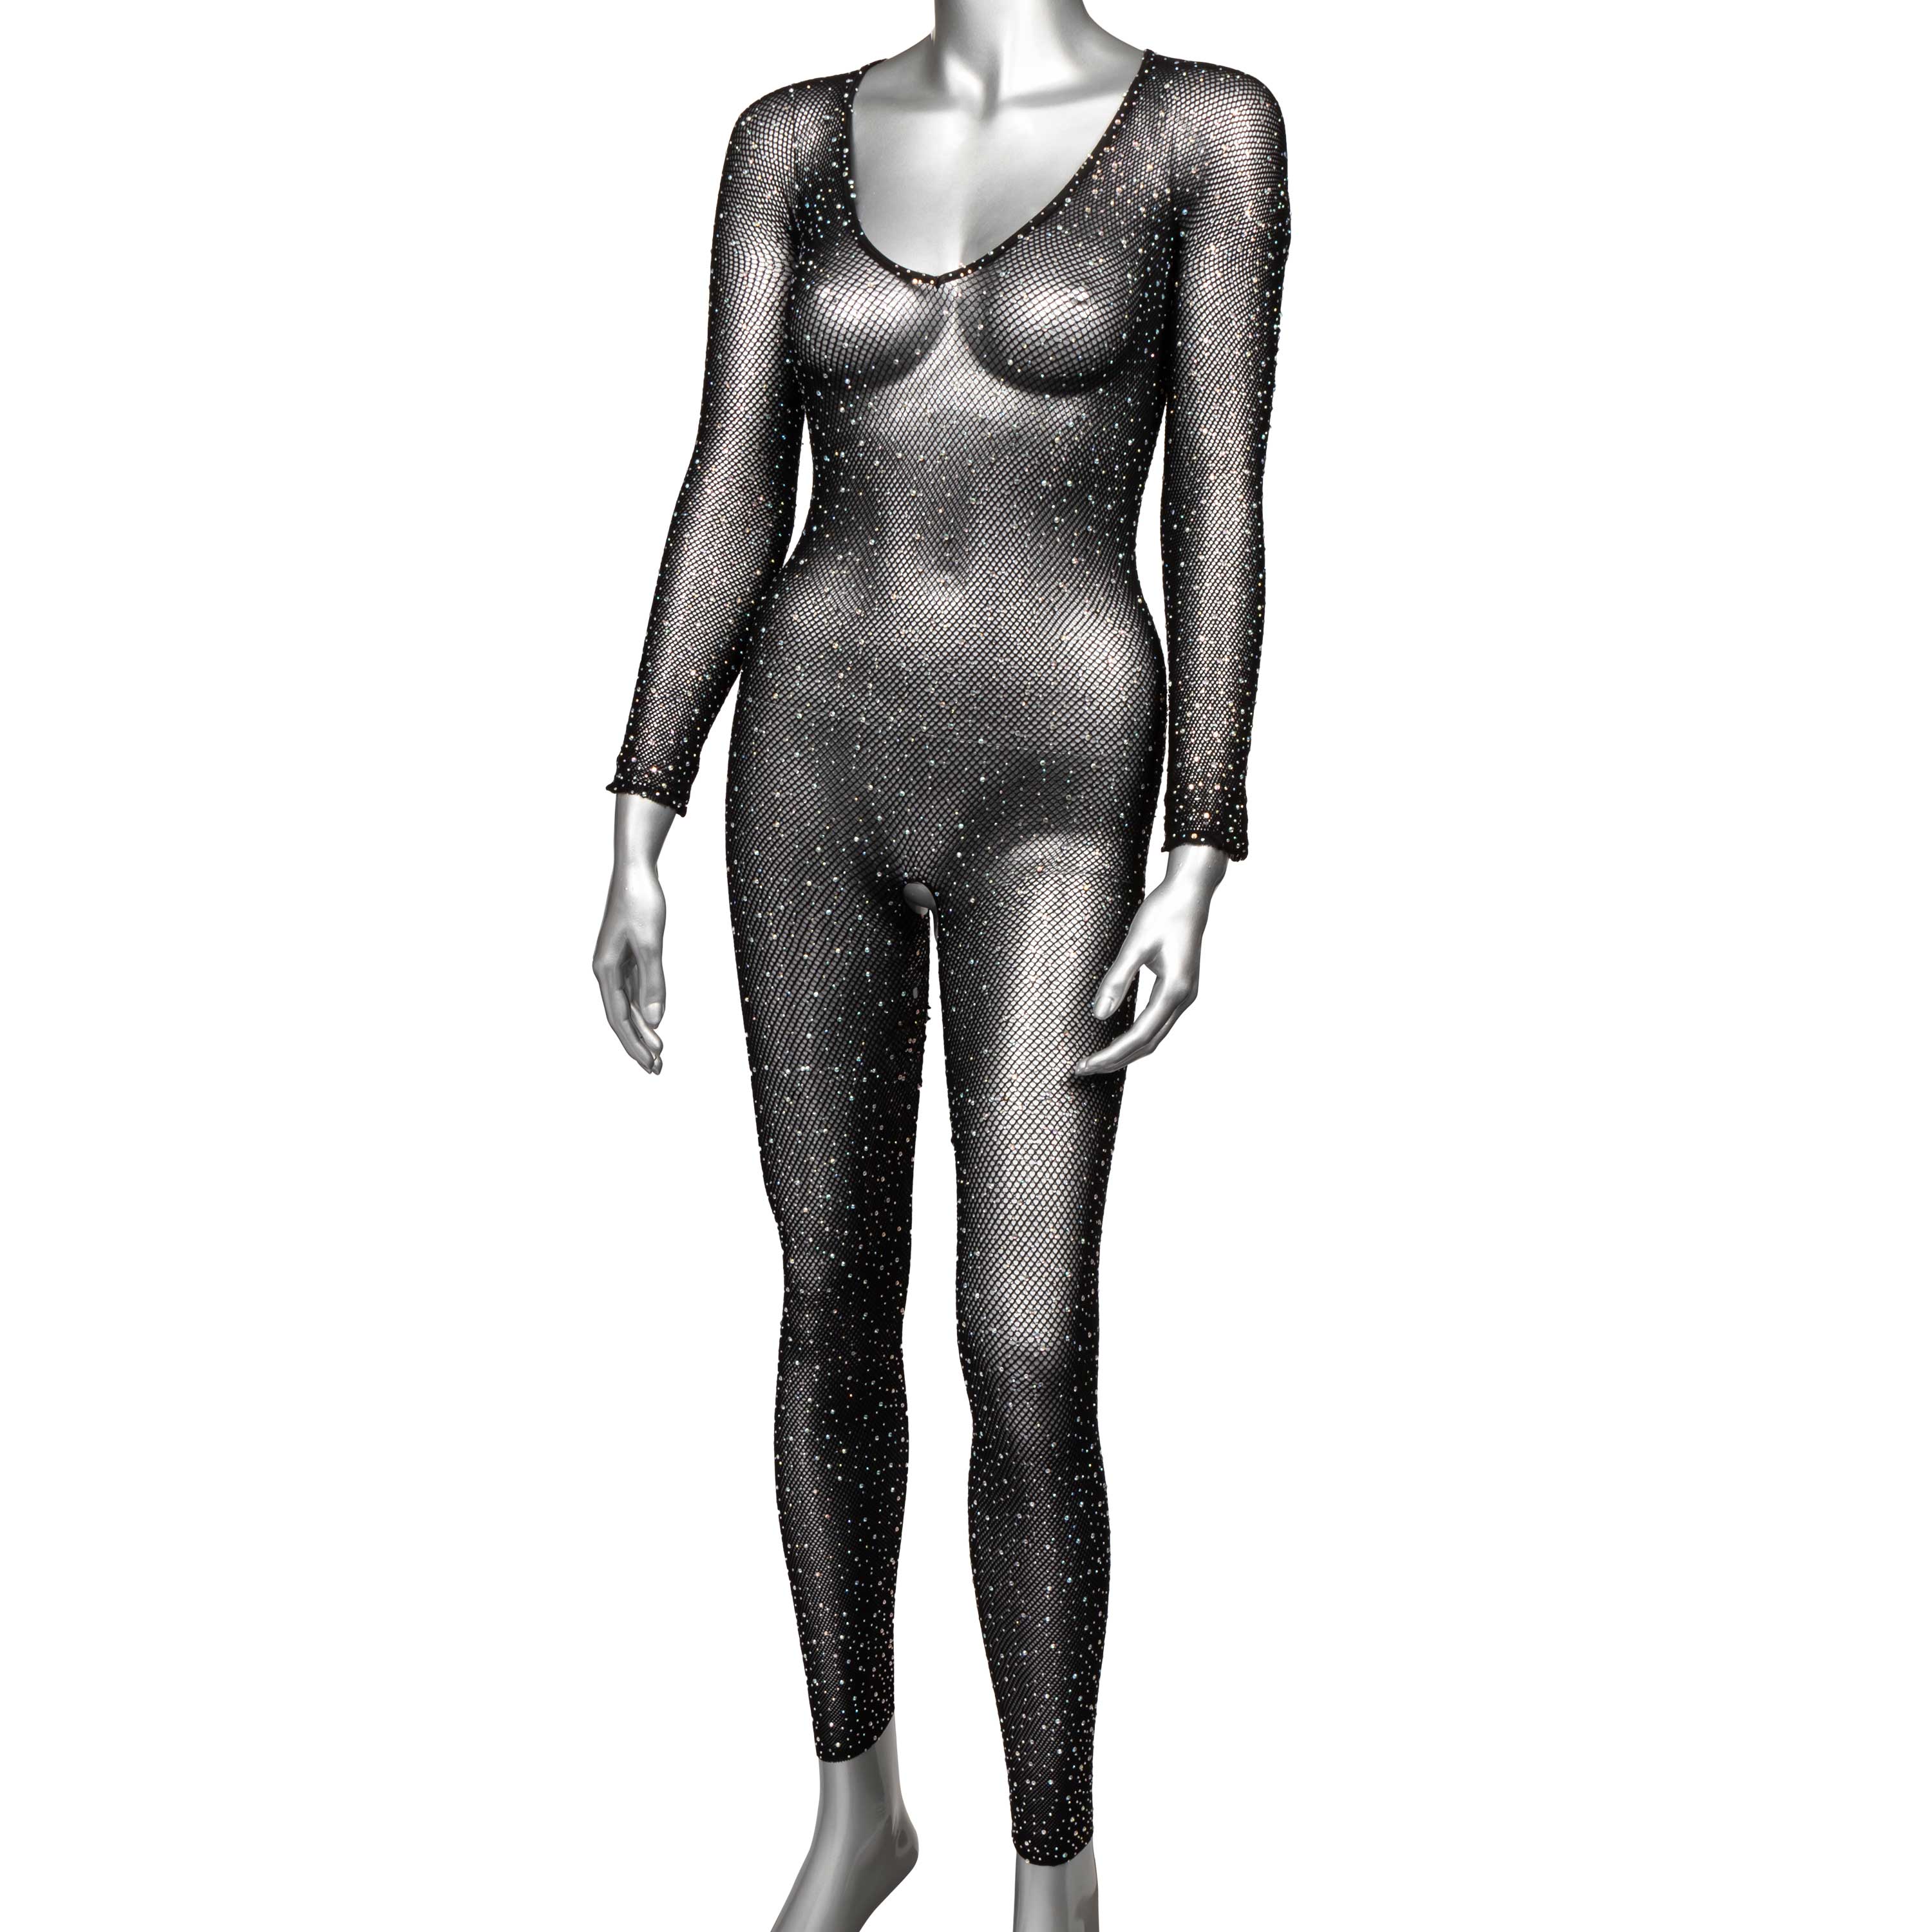 Radiance Crotchless Full Body Suit - One Size -  Black-6